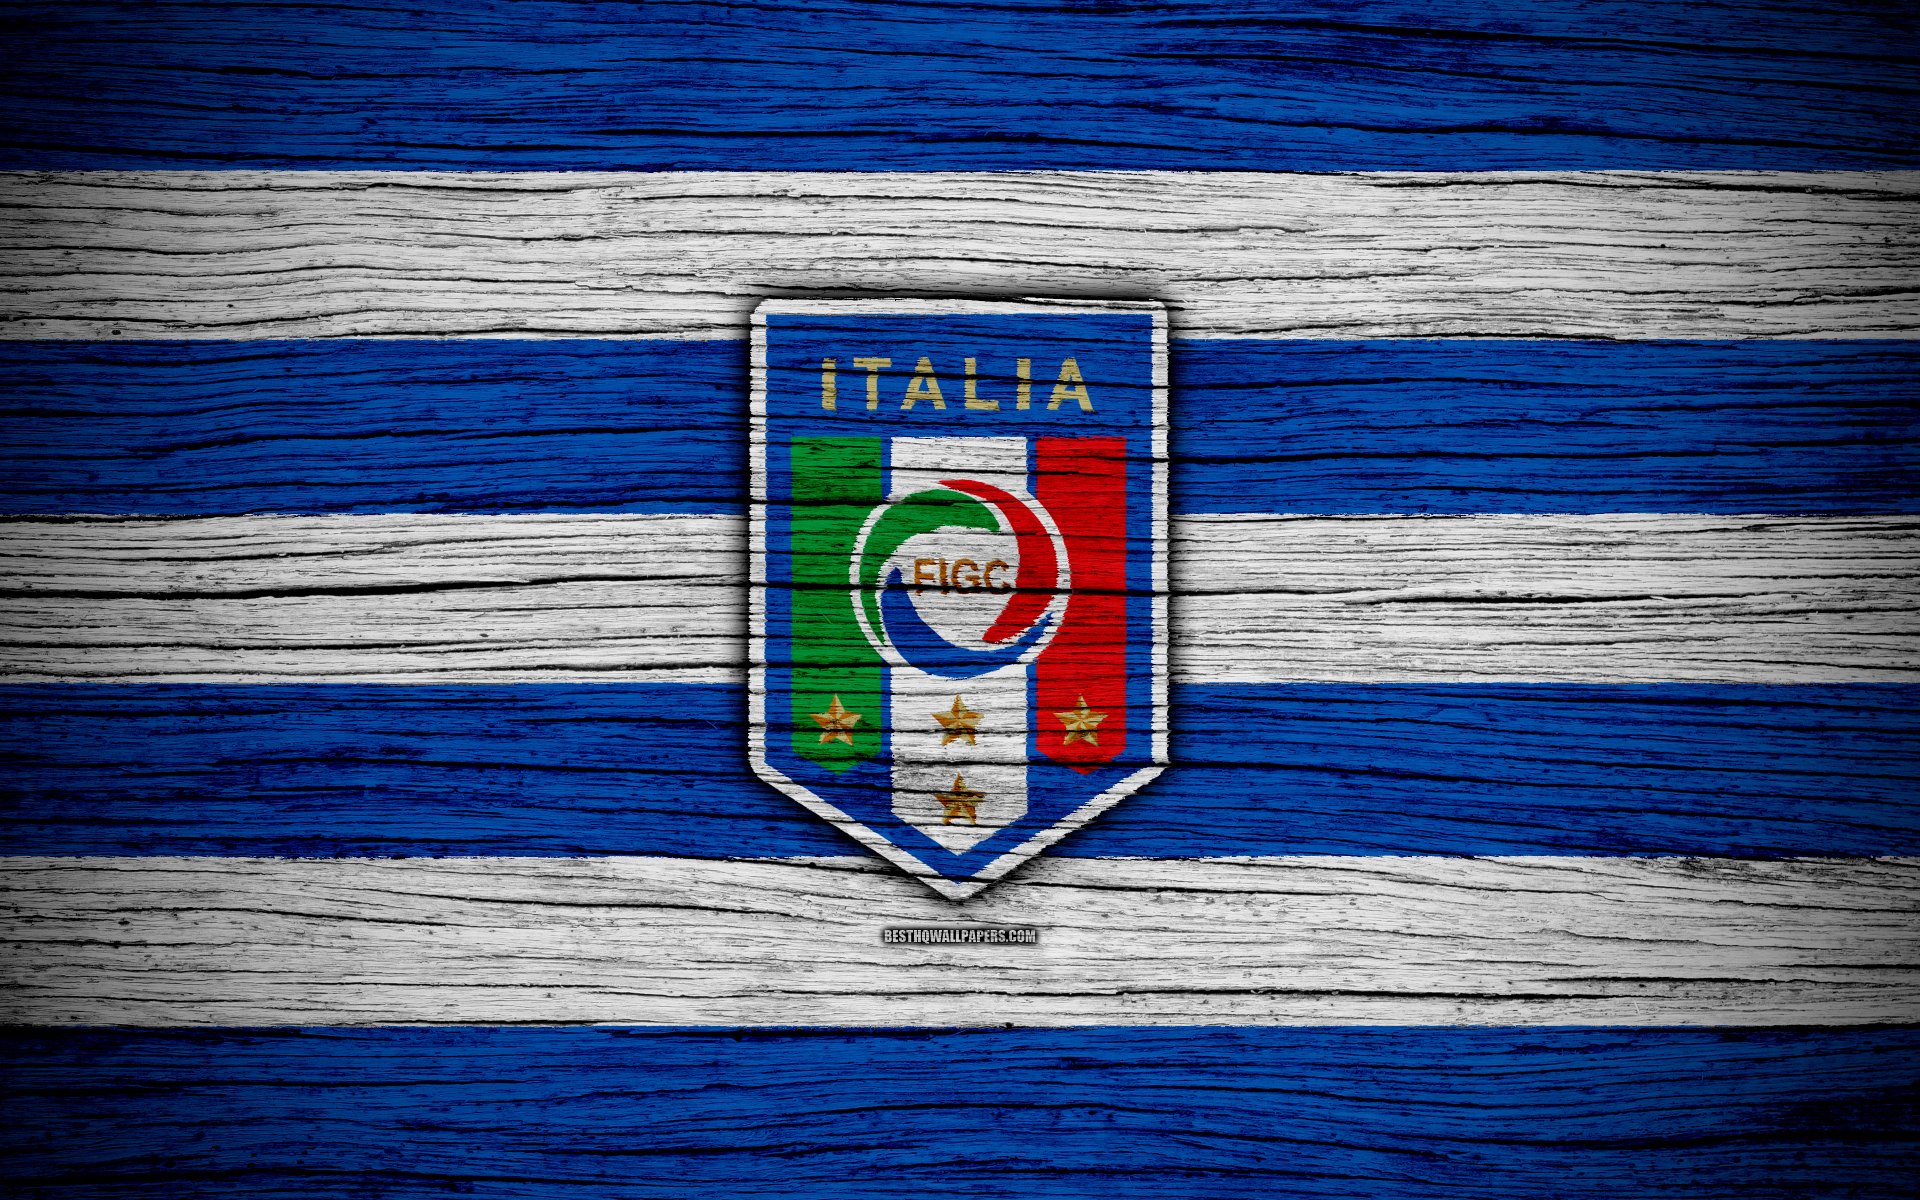 Italy National Football Team 4k Ultra HD Wallpaper | Background Image | 3840x2400 | ID:979057 ...